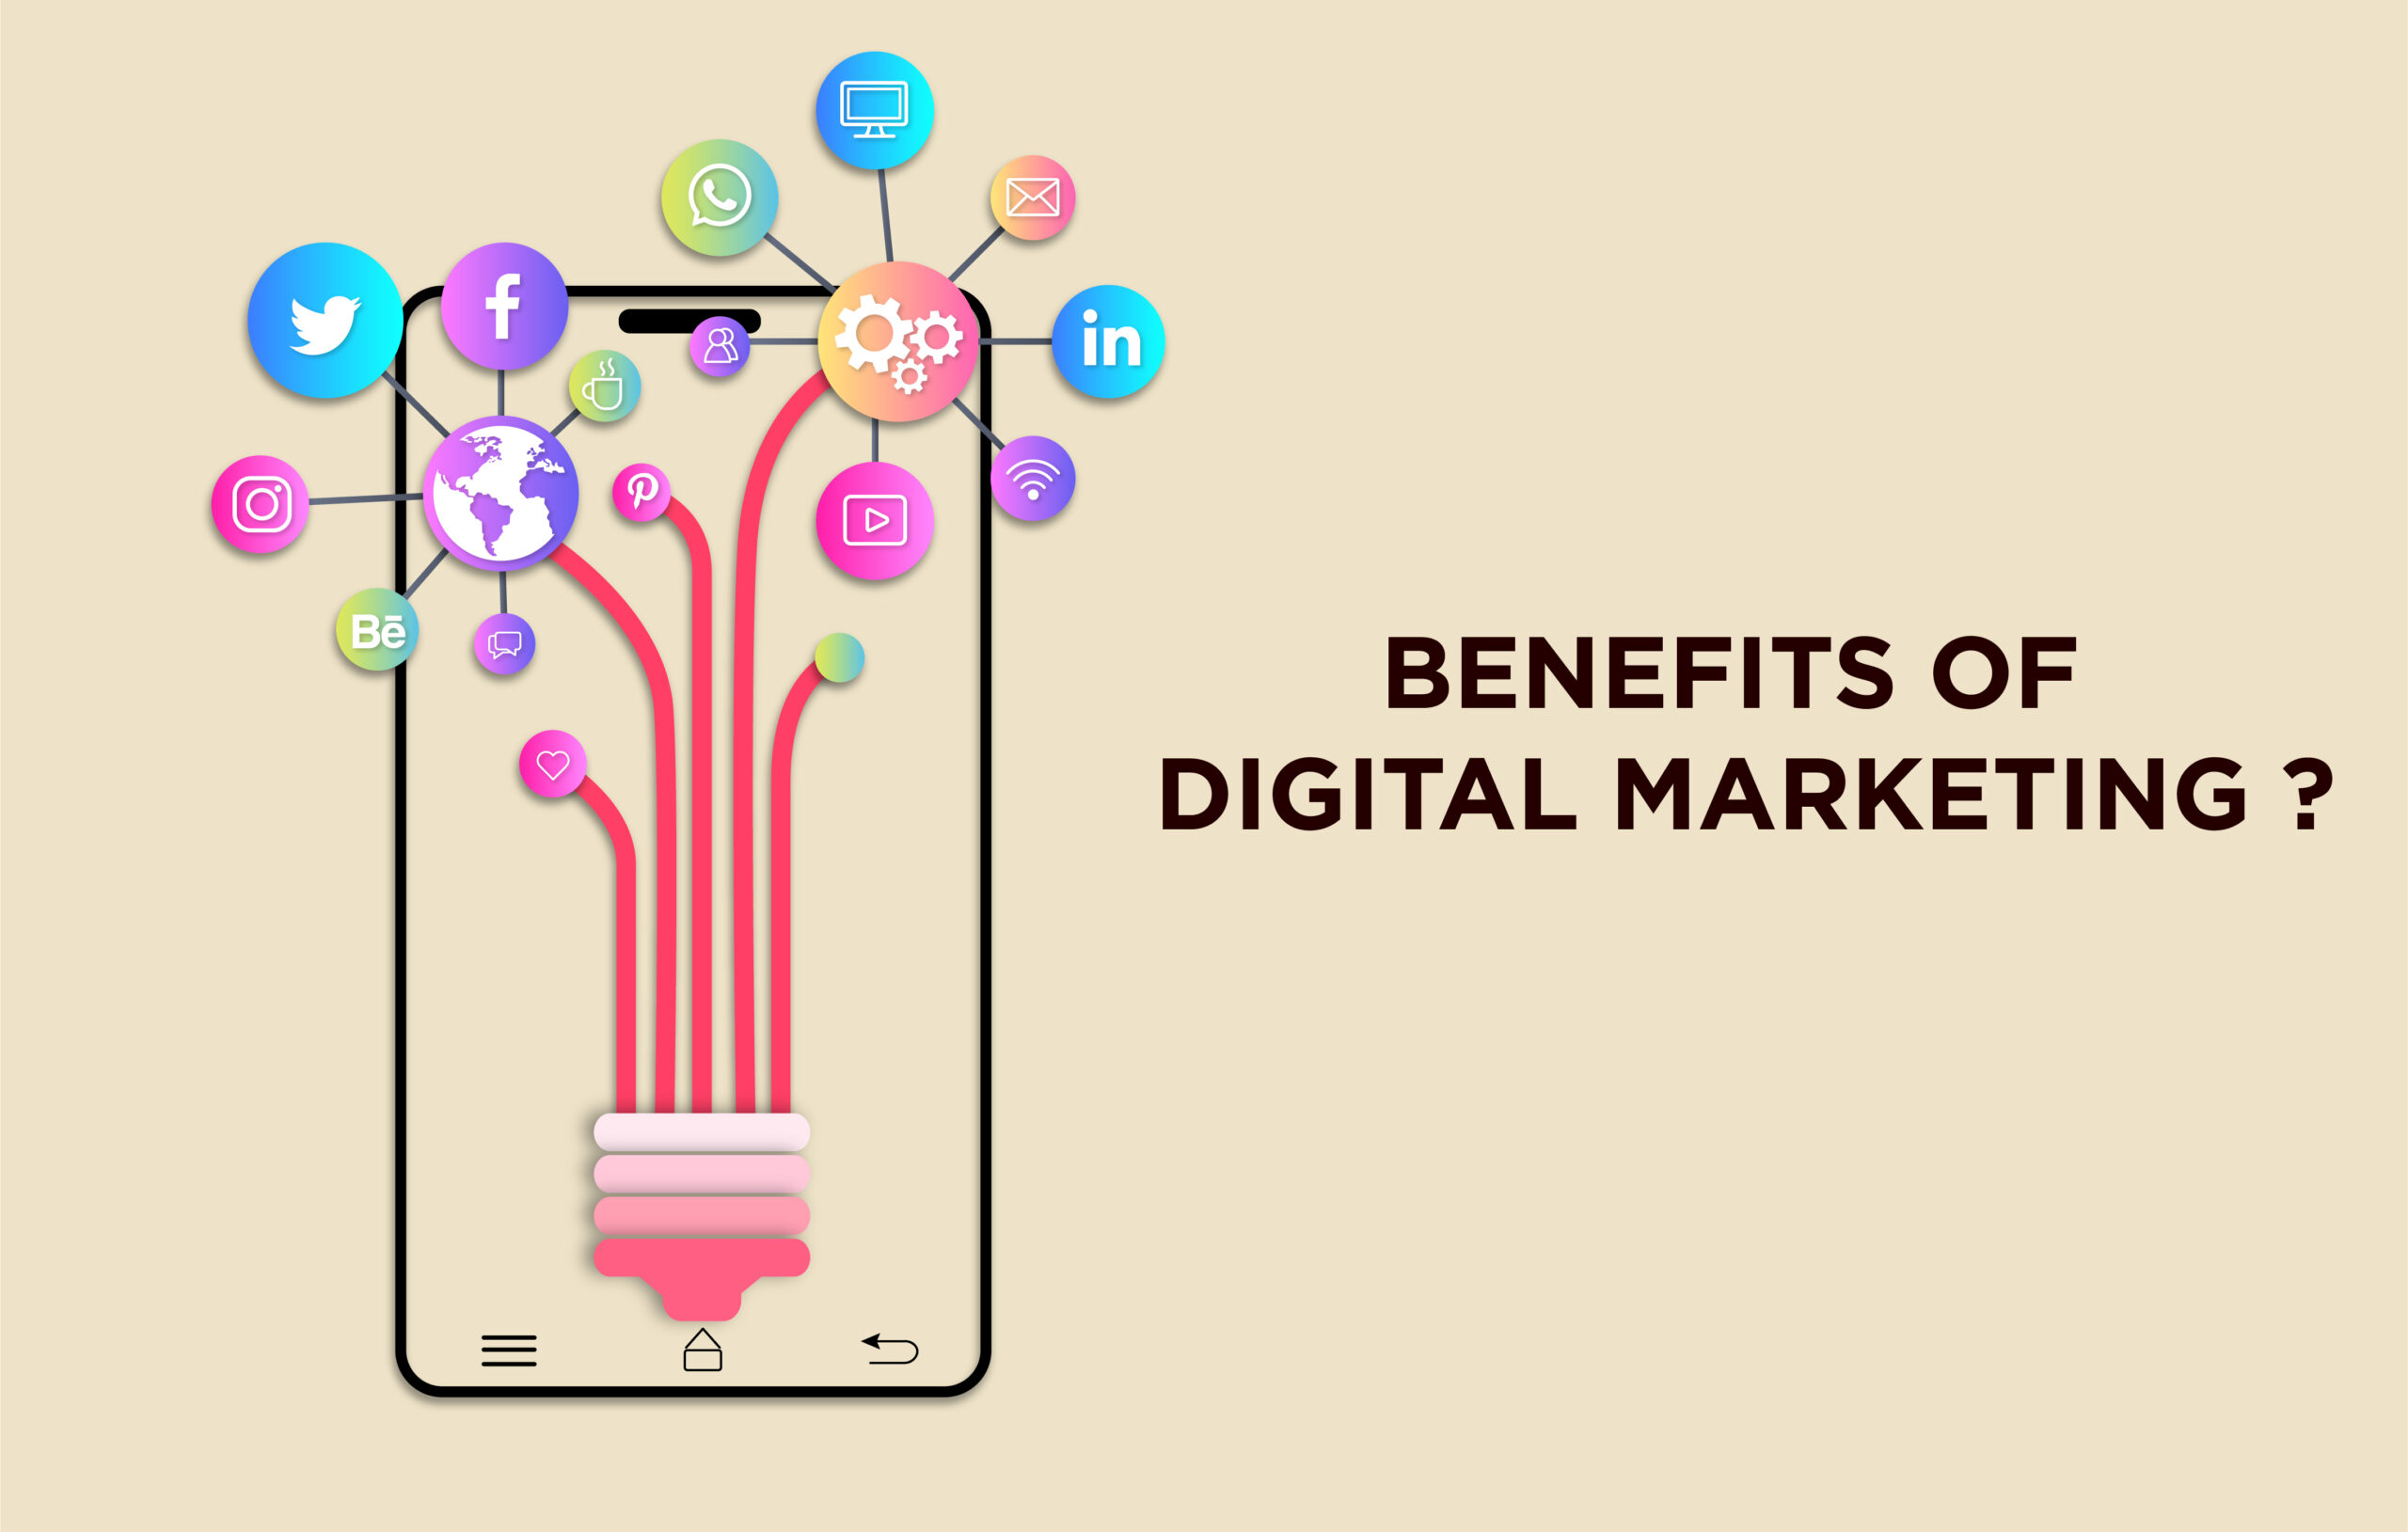 What Are The Benefits Of Digital Marketing?